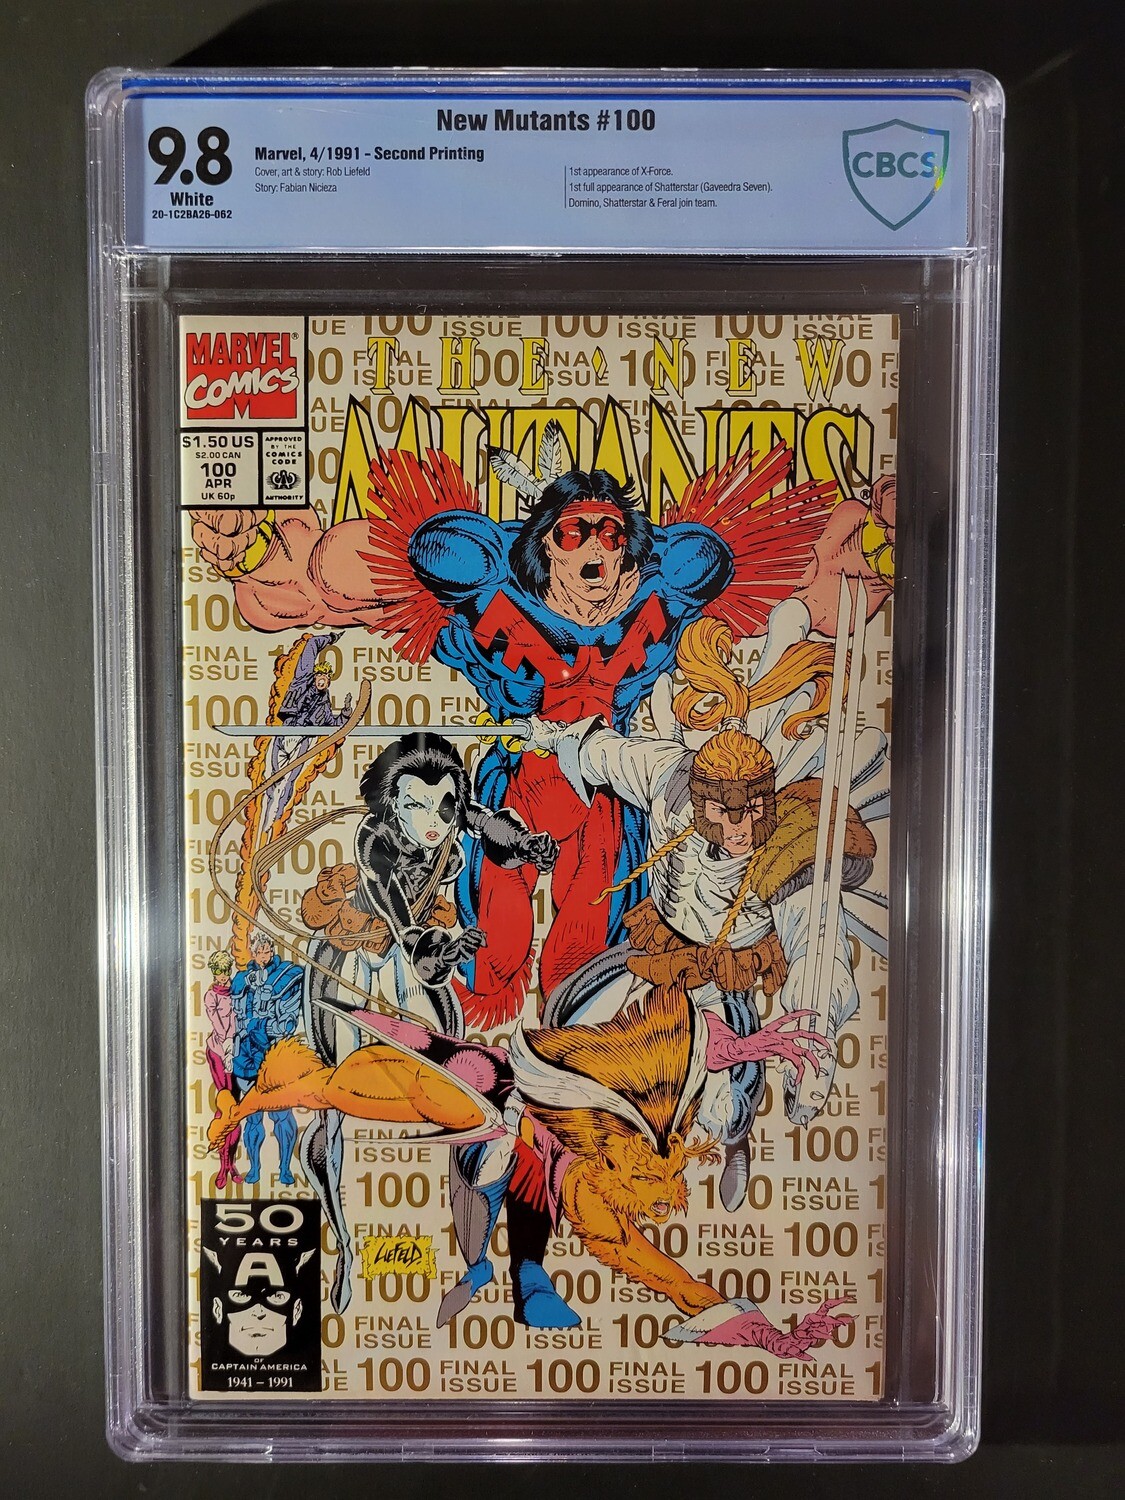 New Mutants #100 (2nd Printing) CBCS 9.8 1st cameo appearance of the X-Force